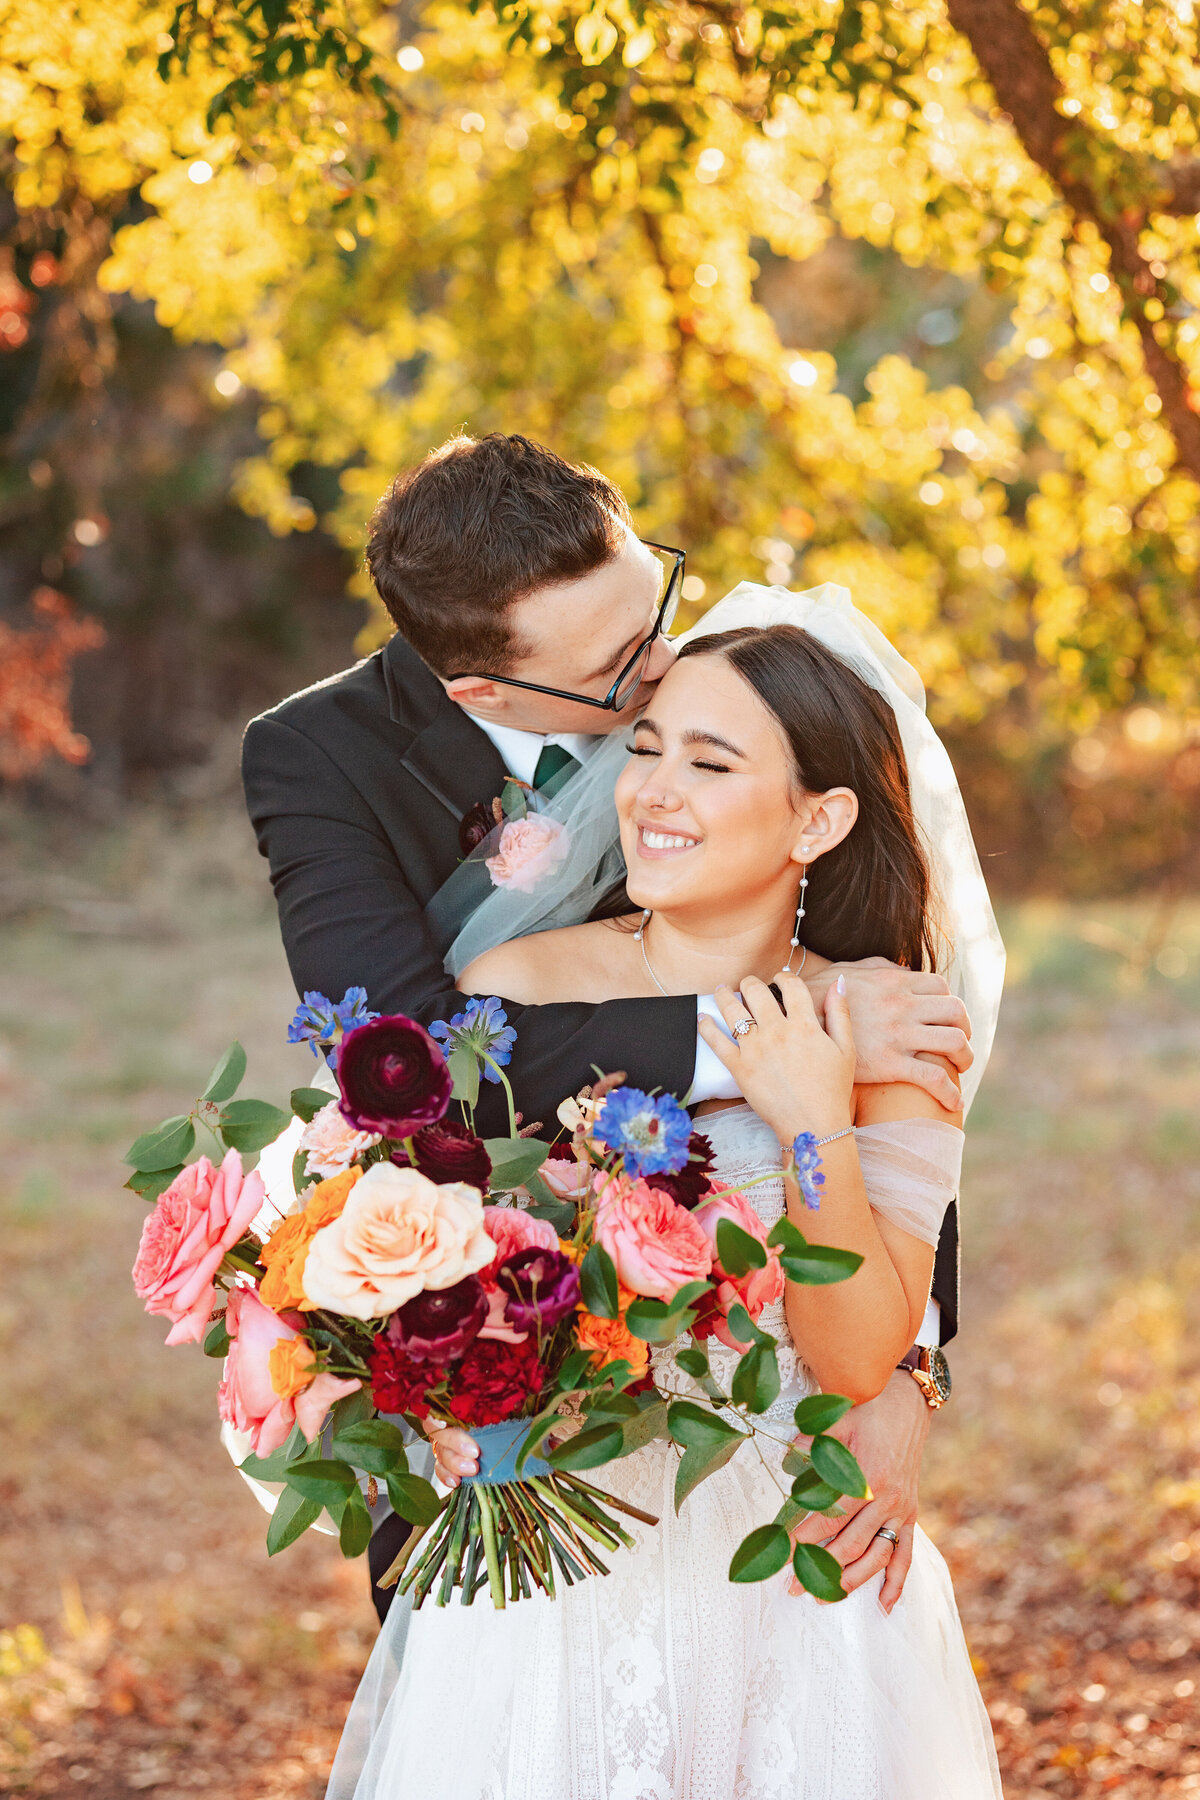 Script your love story at Morgan Creek Barn. A bold, colorful, and candid wedding in Dripping Springs, Texas – where every moment is unscripted, vibrant, and uniquely yours.